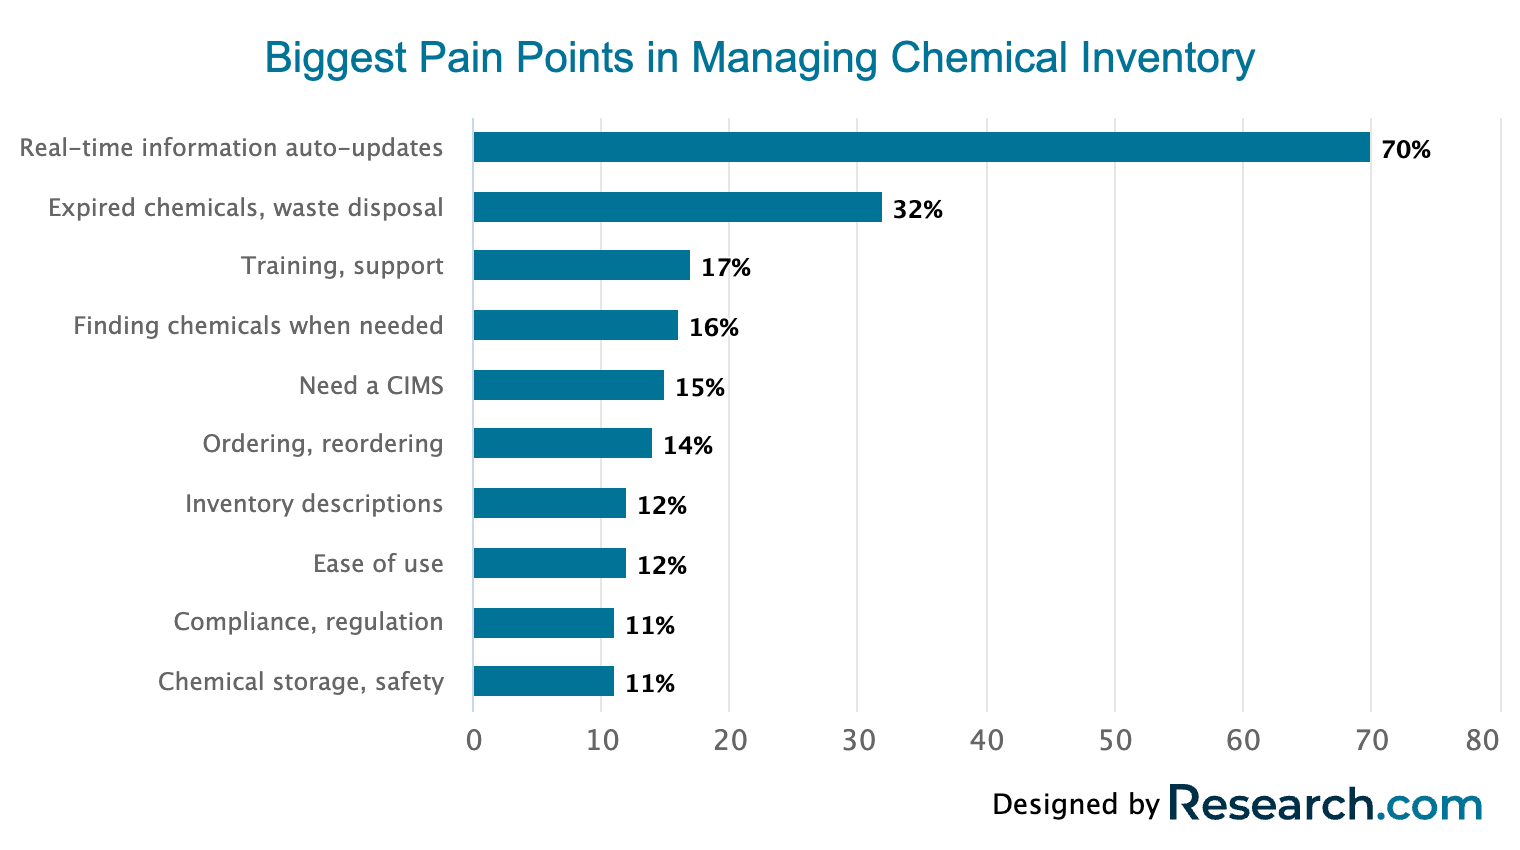 Biggest pain points in managing chemical inventory